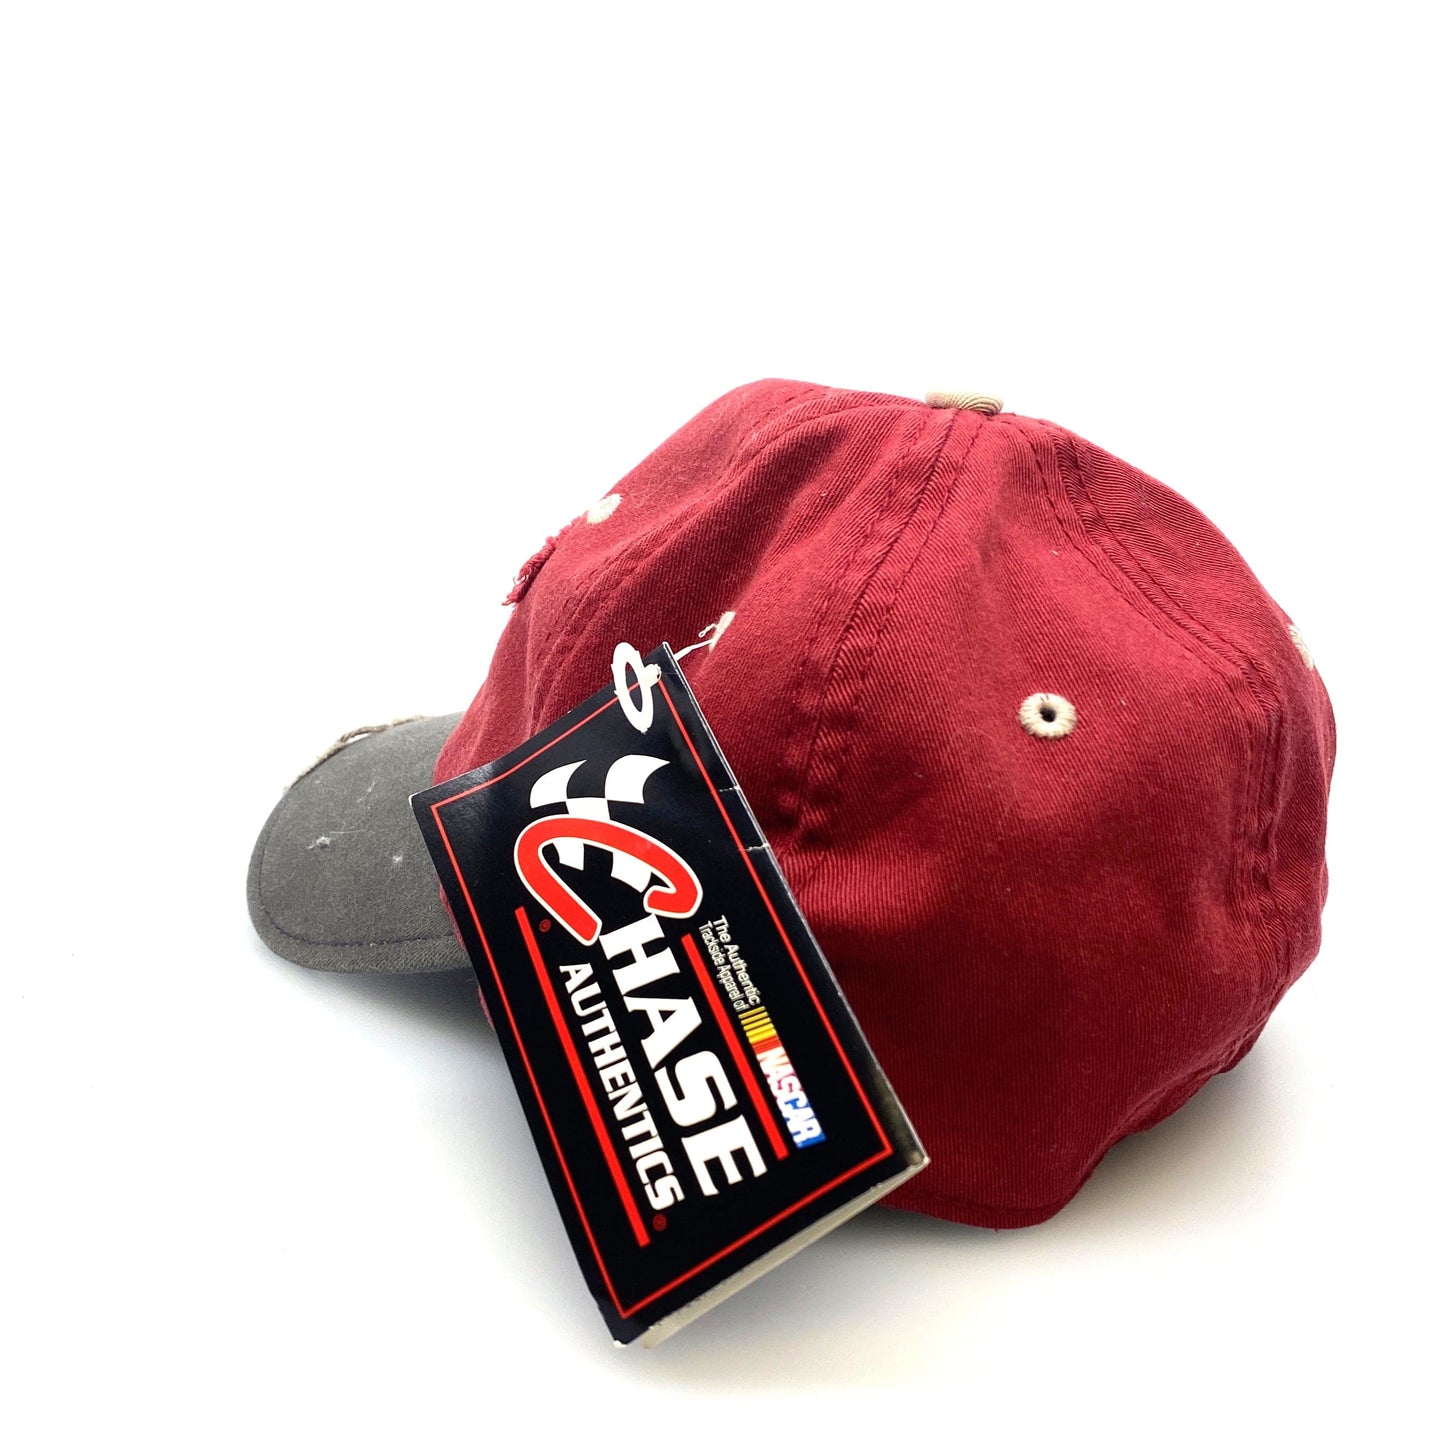 NASCAR Chase Authentics Mens #9 Kasey Kahne Racing Hat, Red Gray OS Flex